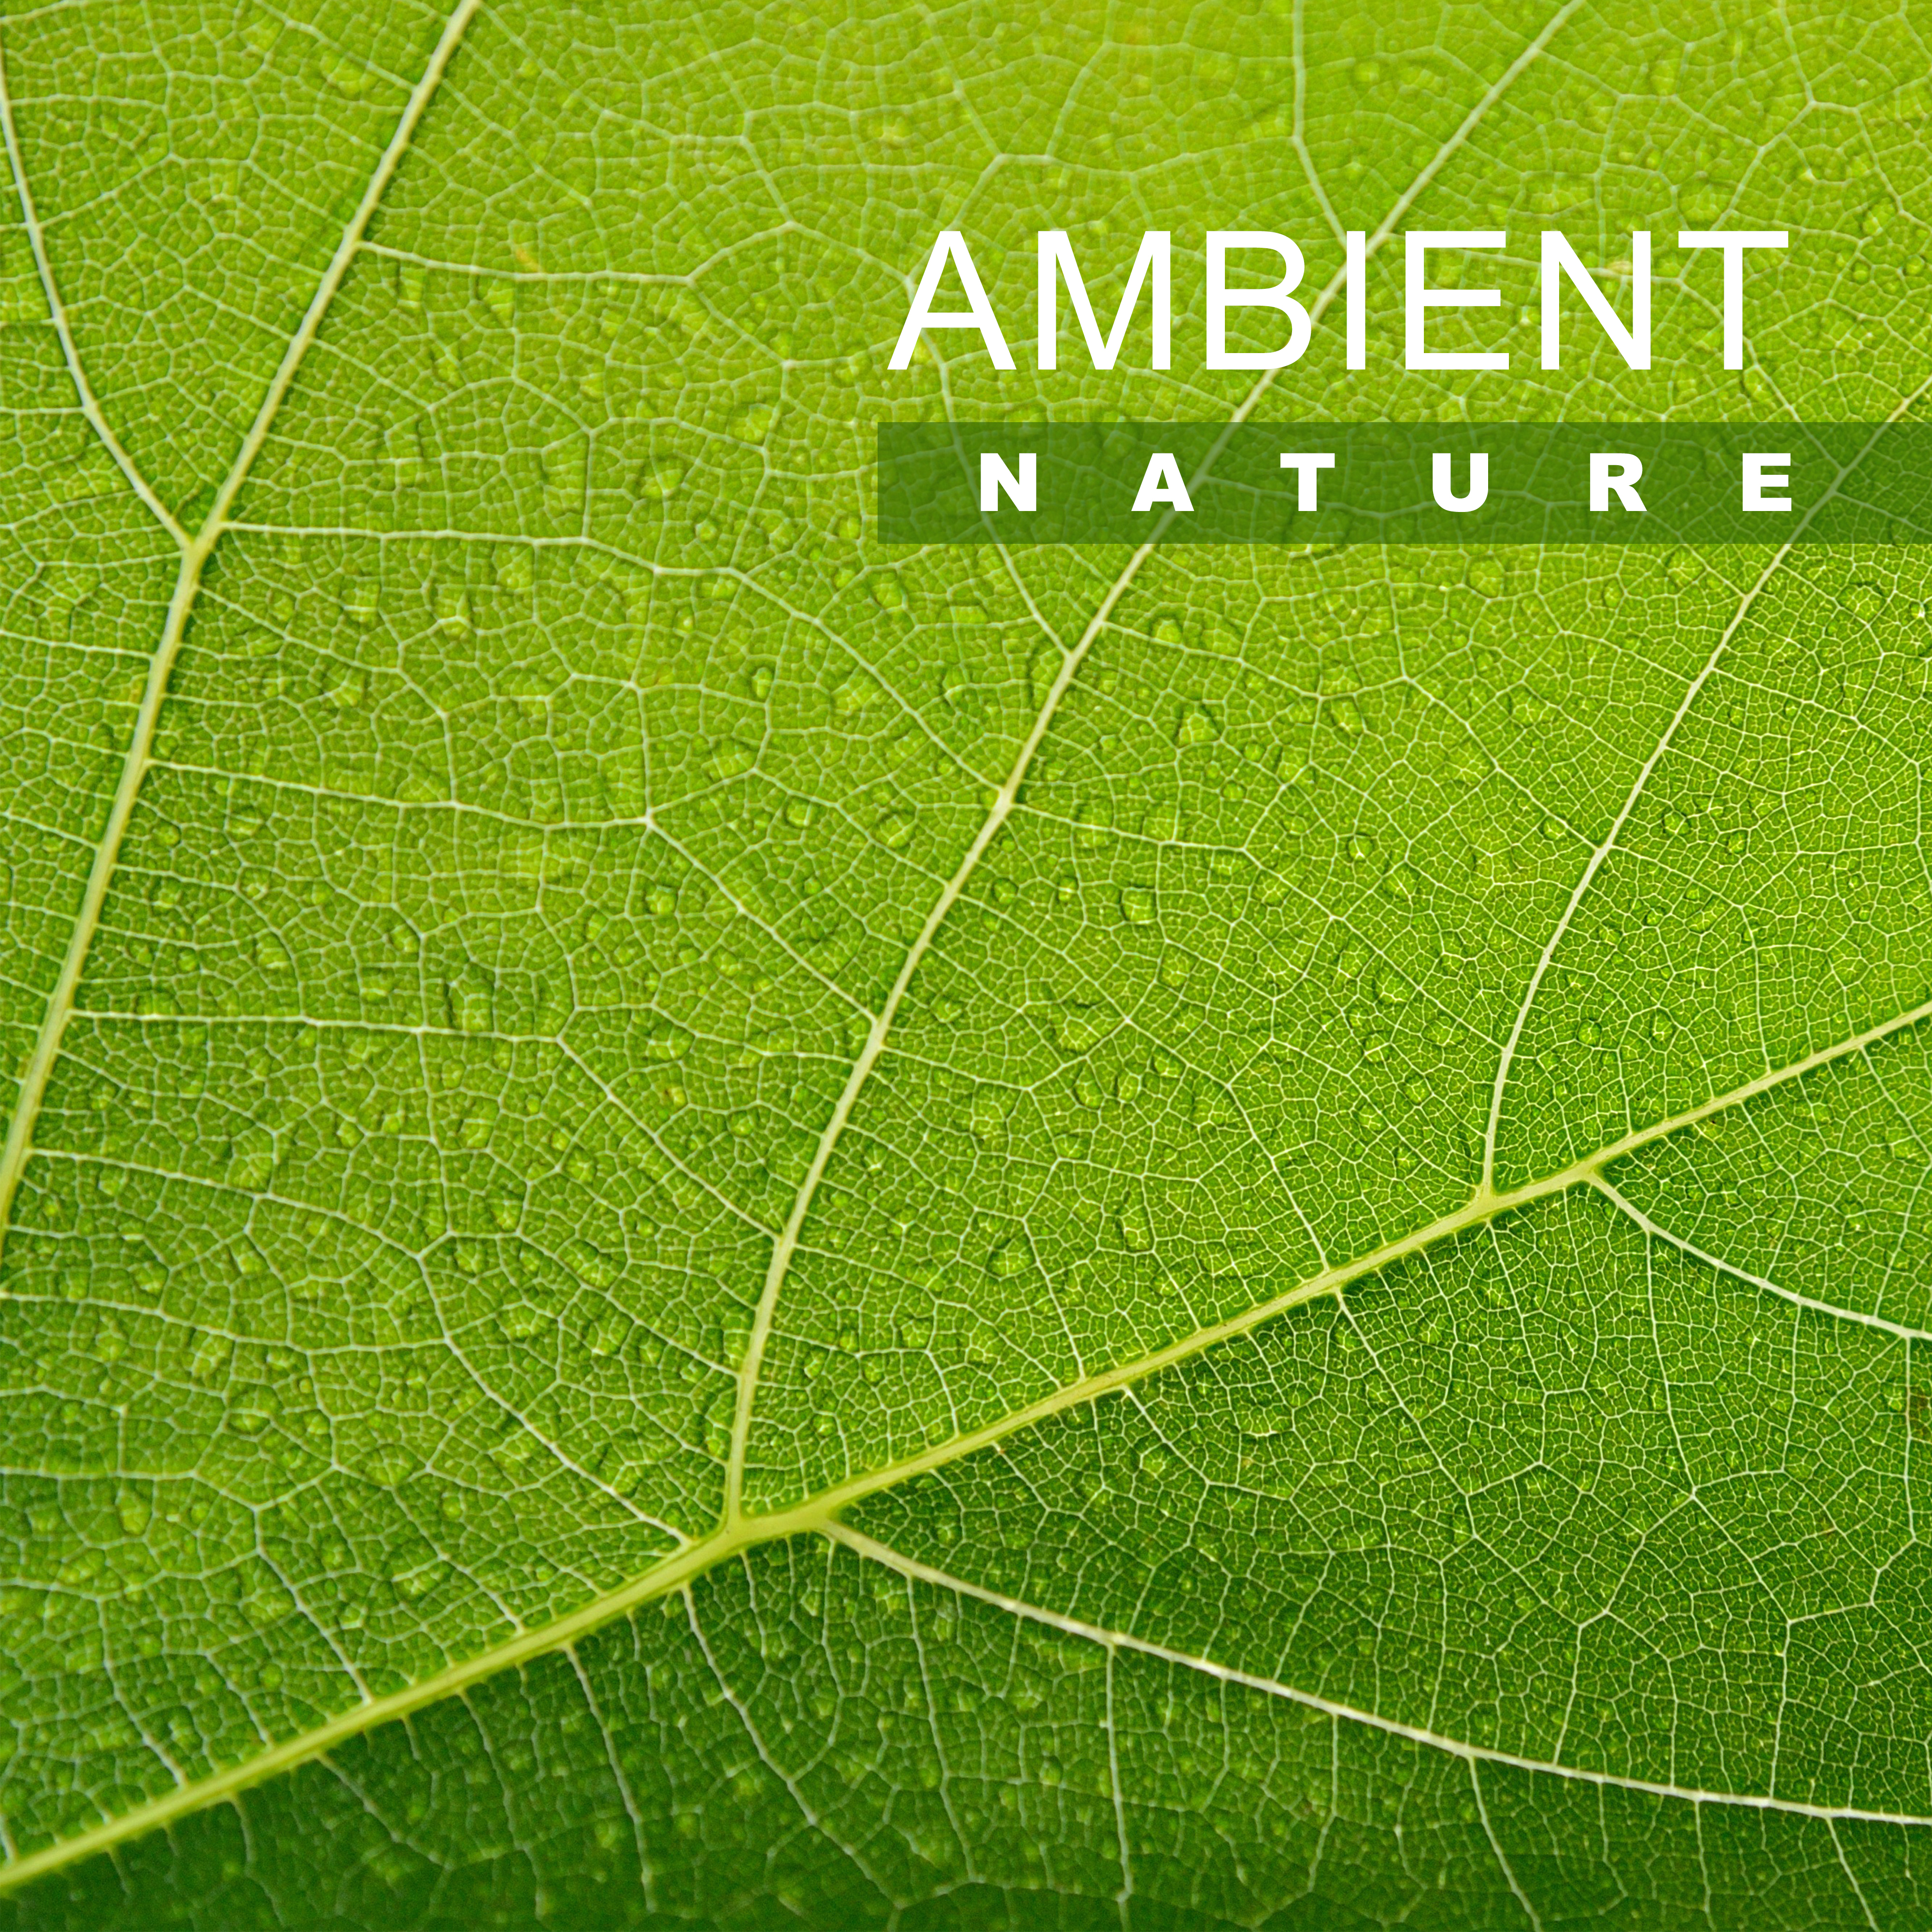 Ambient Nature – Calm Down with Soothing Sounds, Relaxing Waves, Rest Yourself